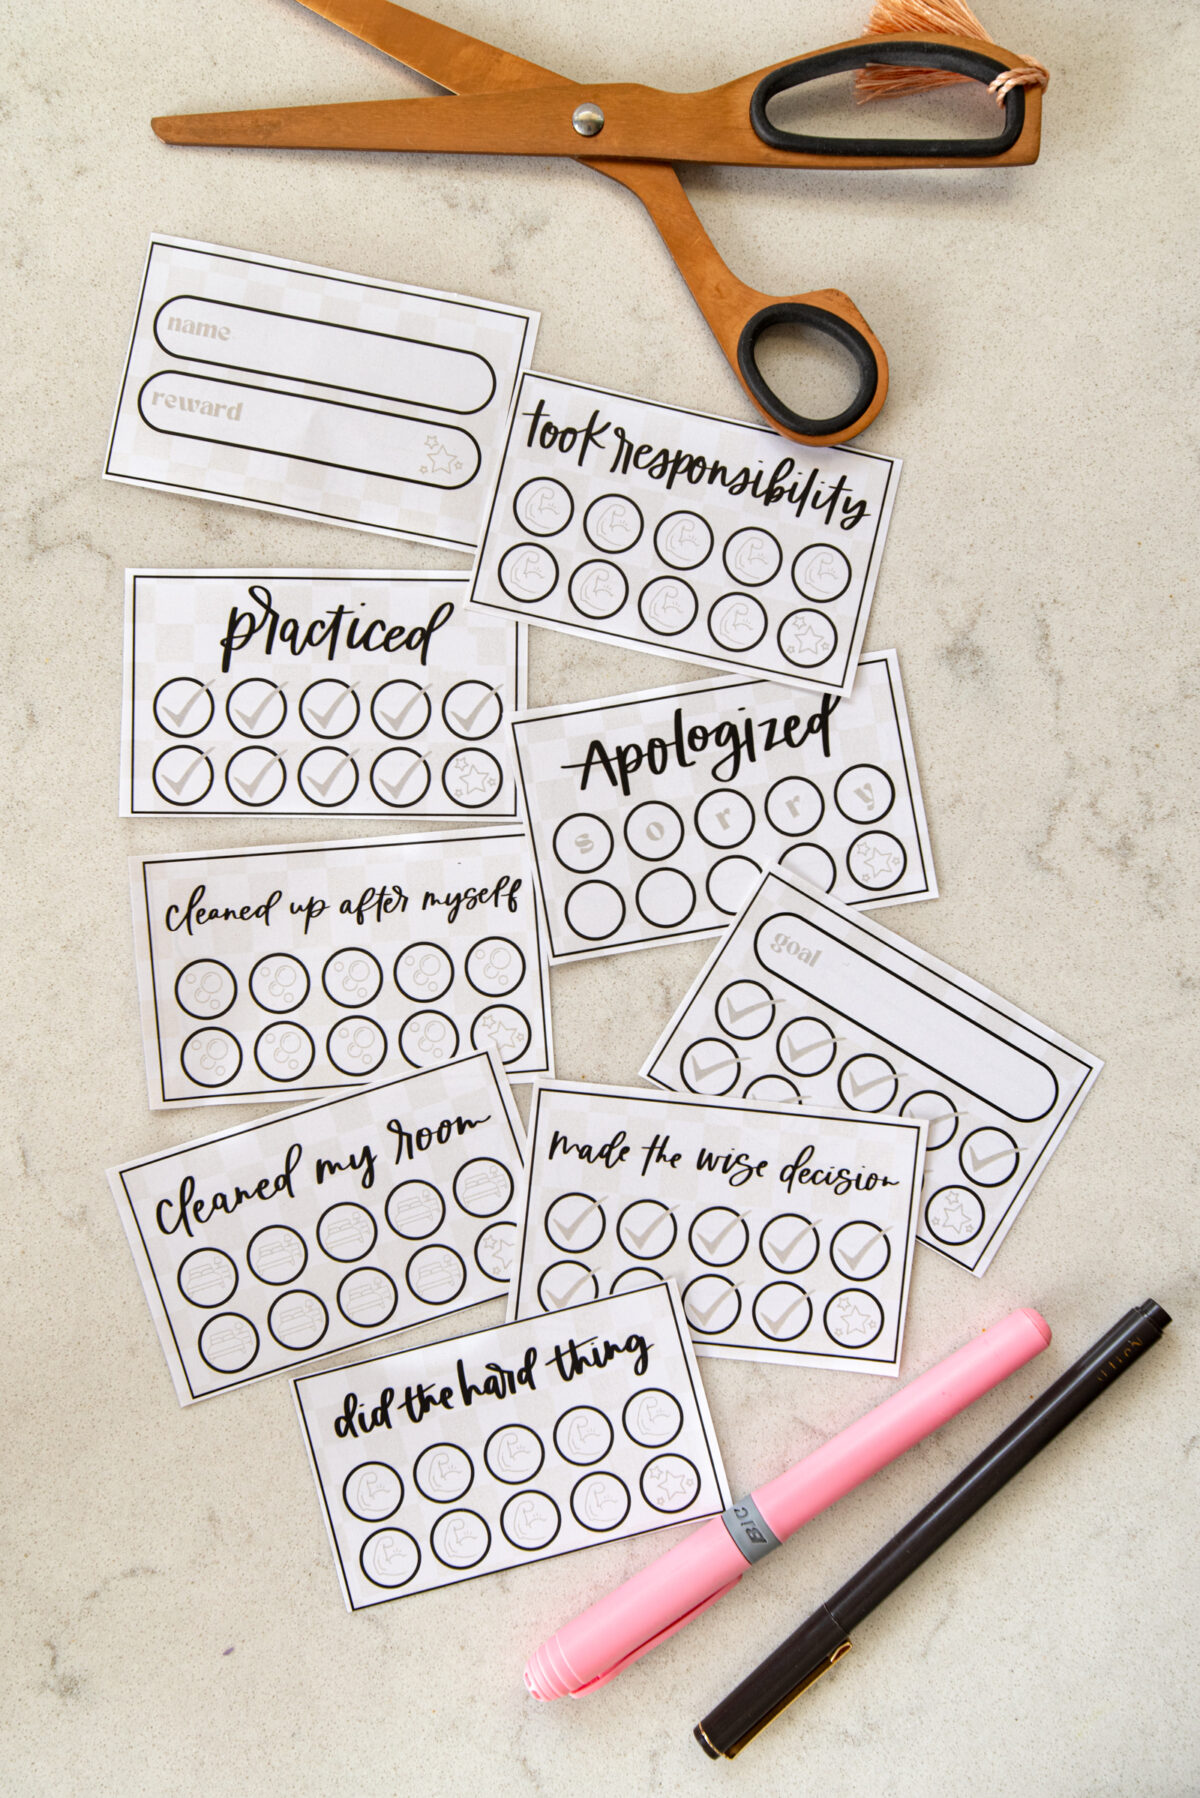 image of printed punch cards for kids, cut to size with scissors punch cards have a soft checkerboard background with hand lettered goals like 'practiced', 'took responsibility', 'apologized', 'cleaned up after myself' and 'made the wise decision'